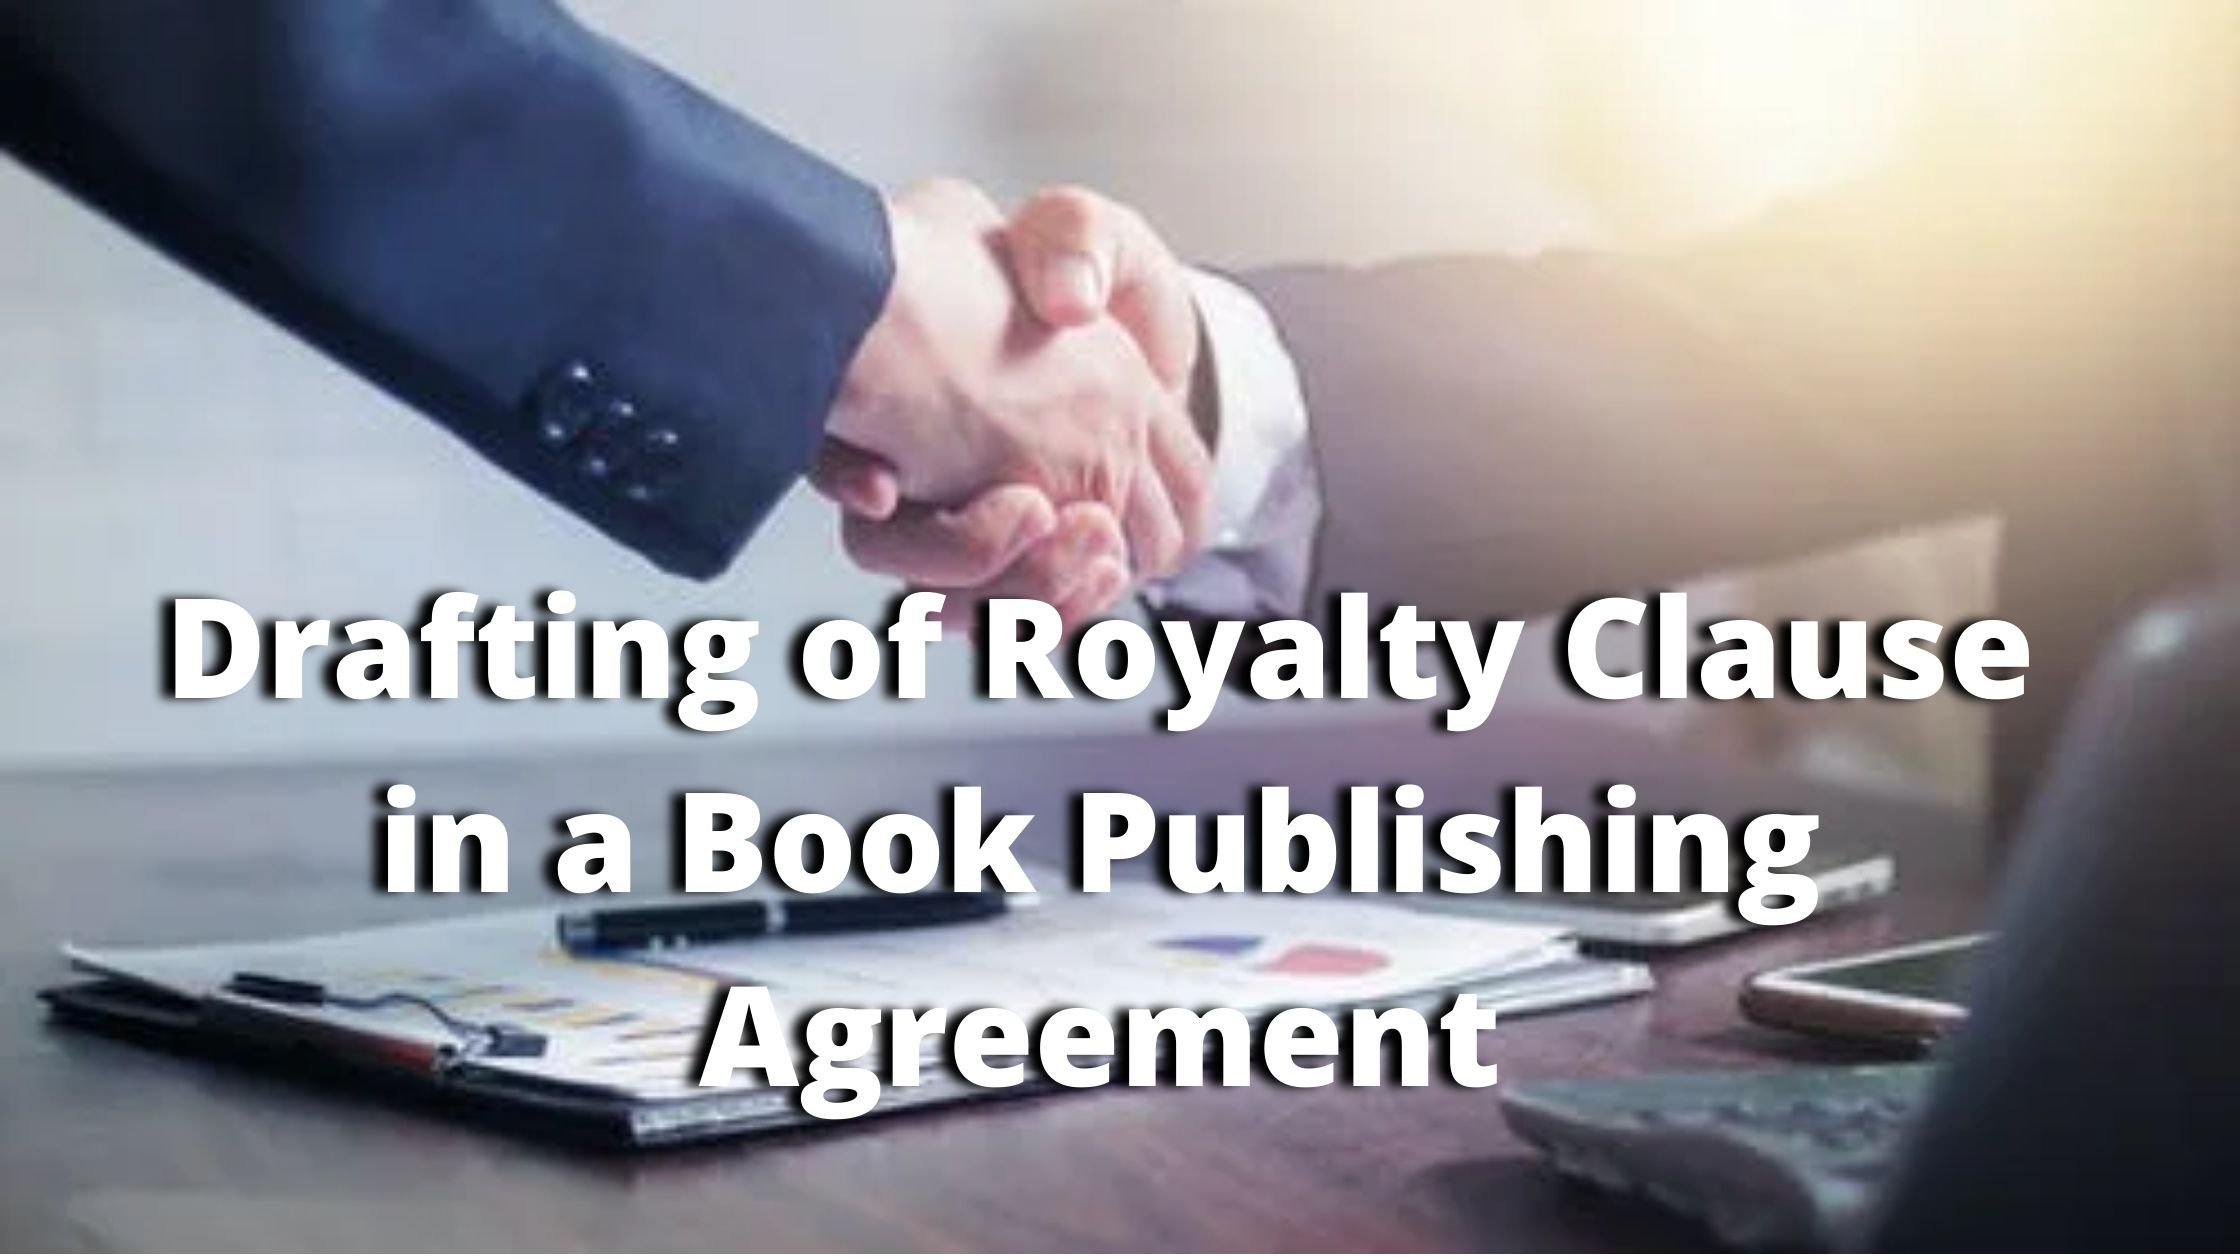 Drafting of Royalty Clause in a Book Publishing Agreement